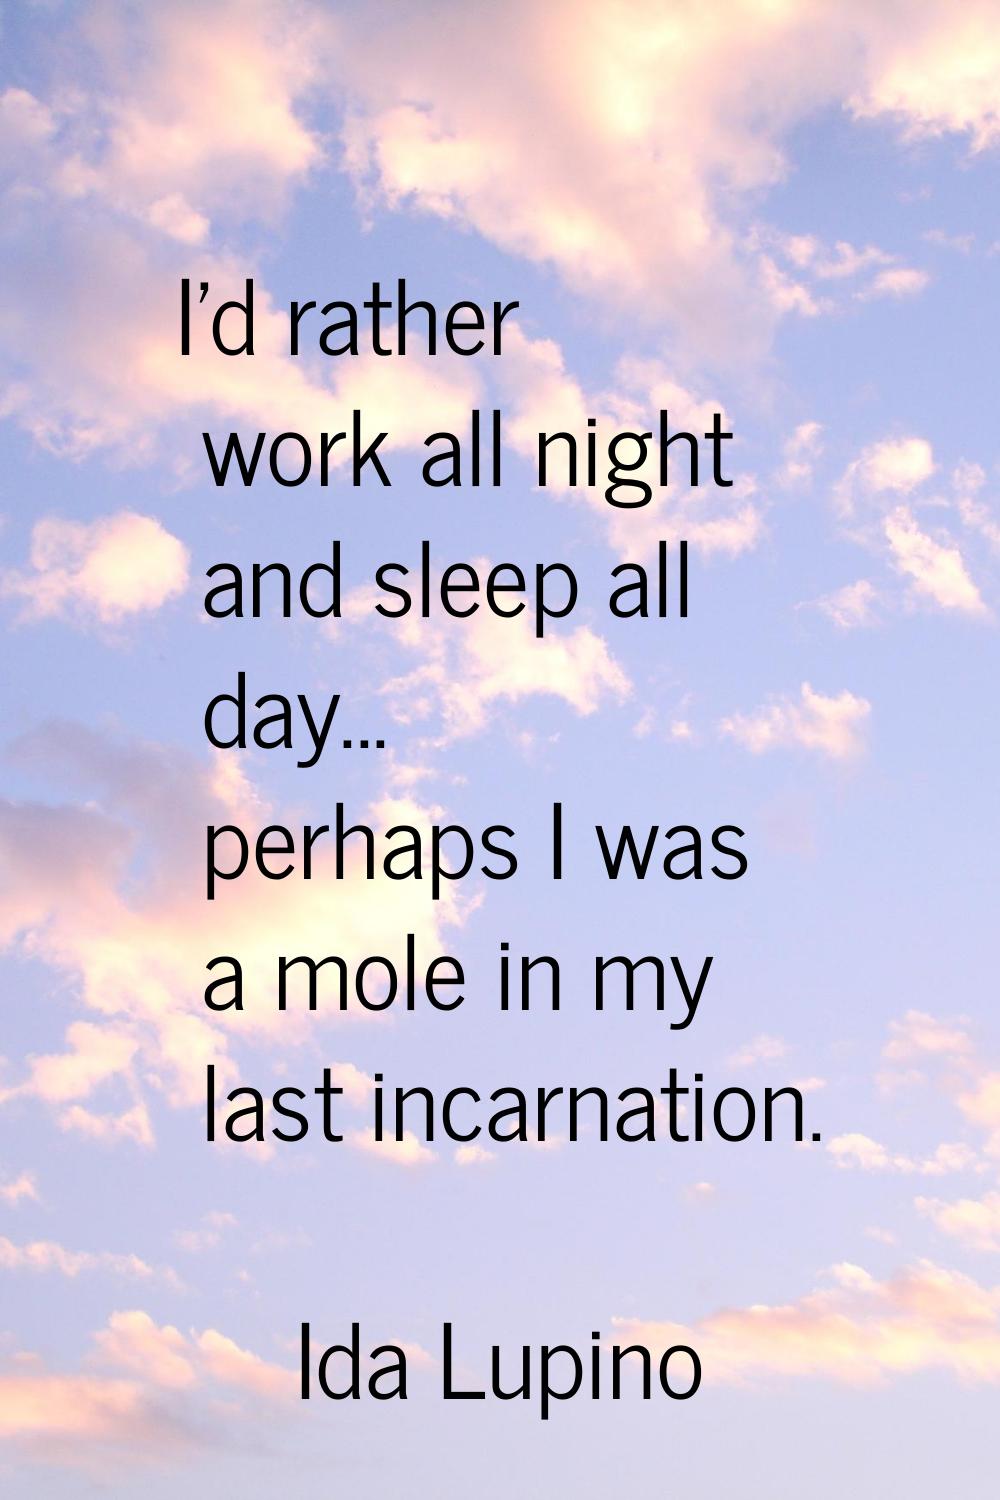 I'd rather work all night and sleep all day... perhaps I was a mole in my last incarnation.